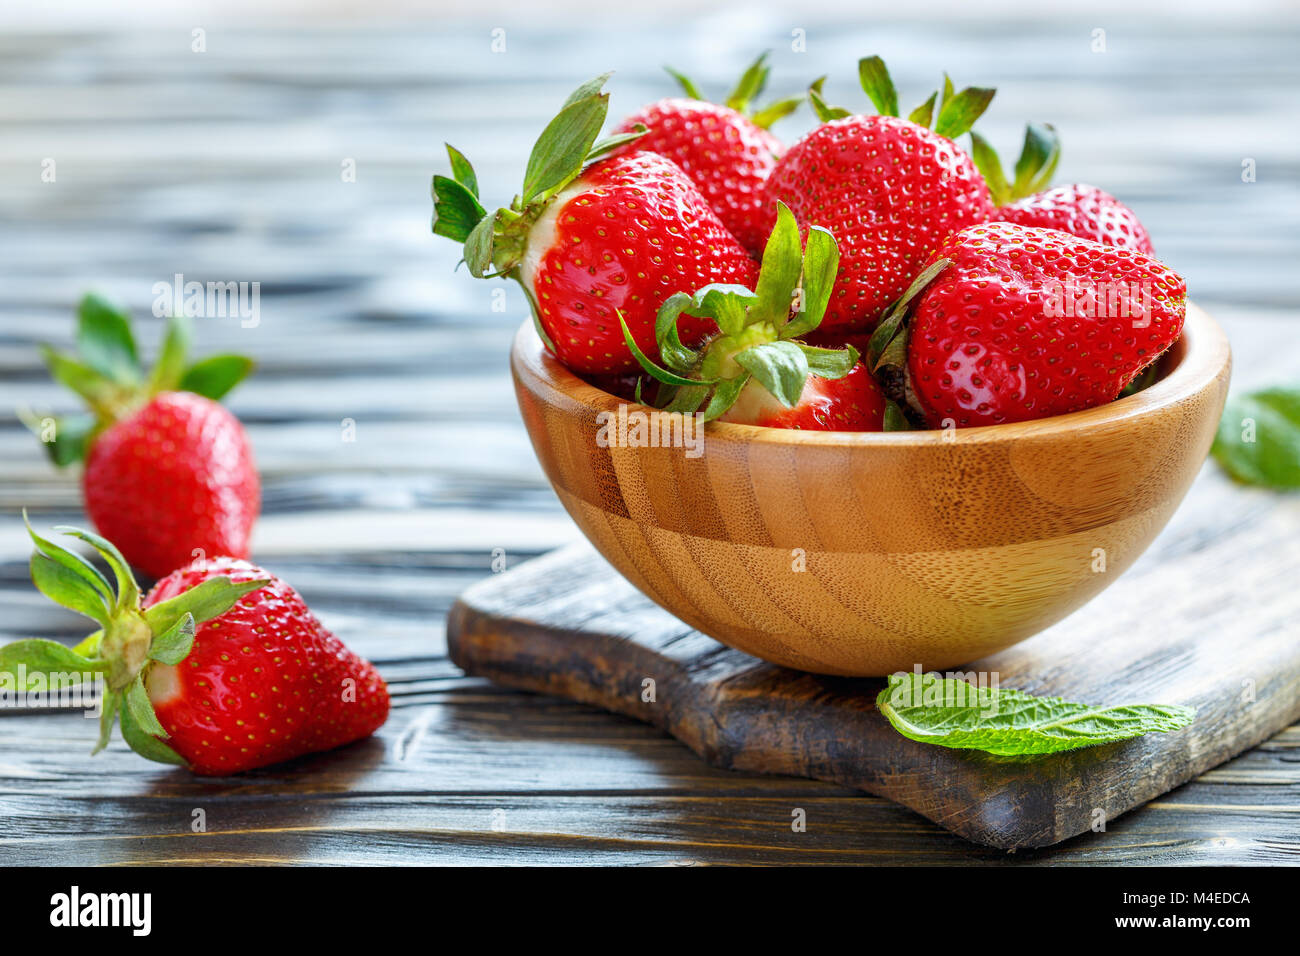 Ripe red strawberries in a wooden bowl. Stock Photo